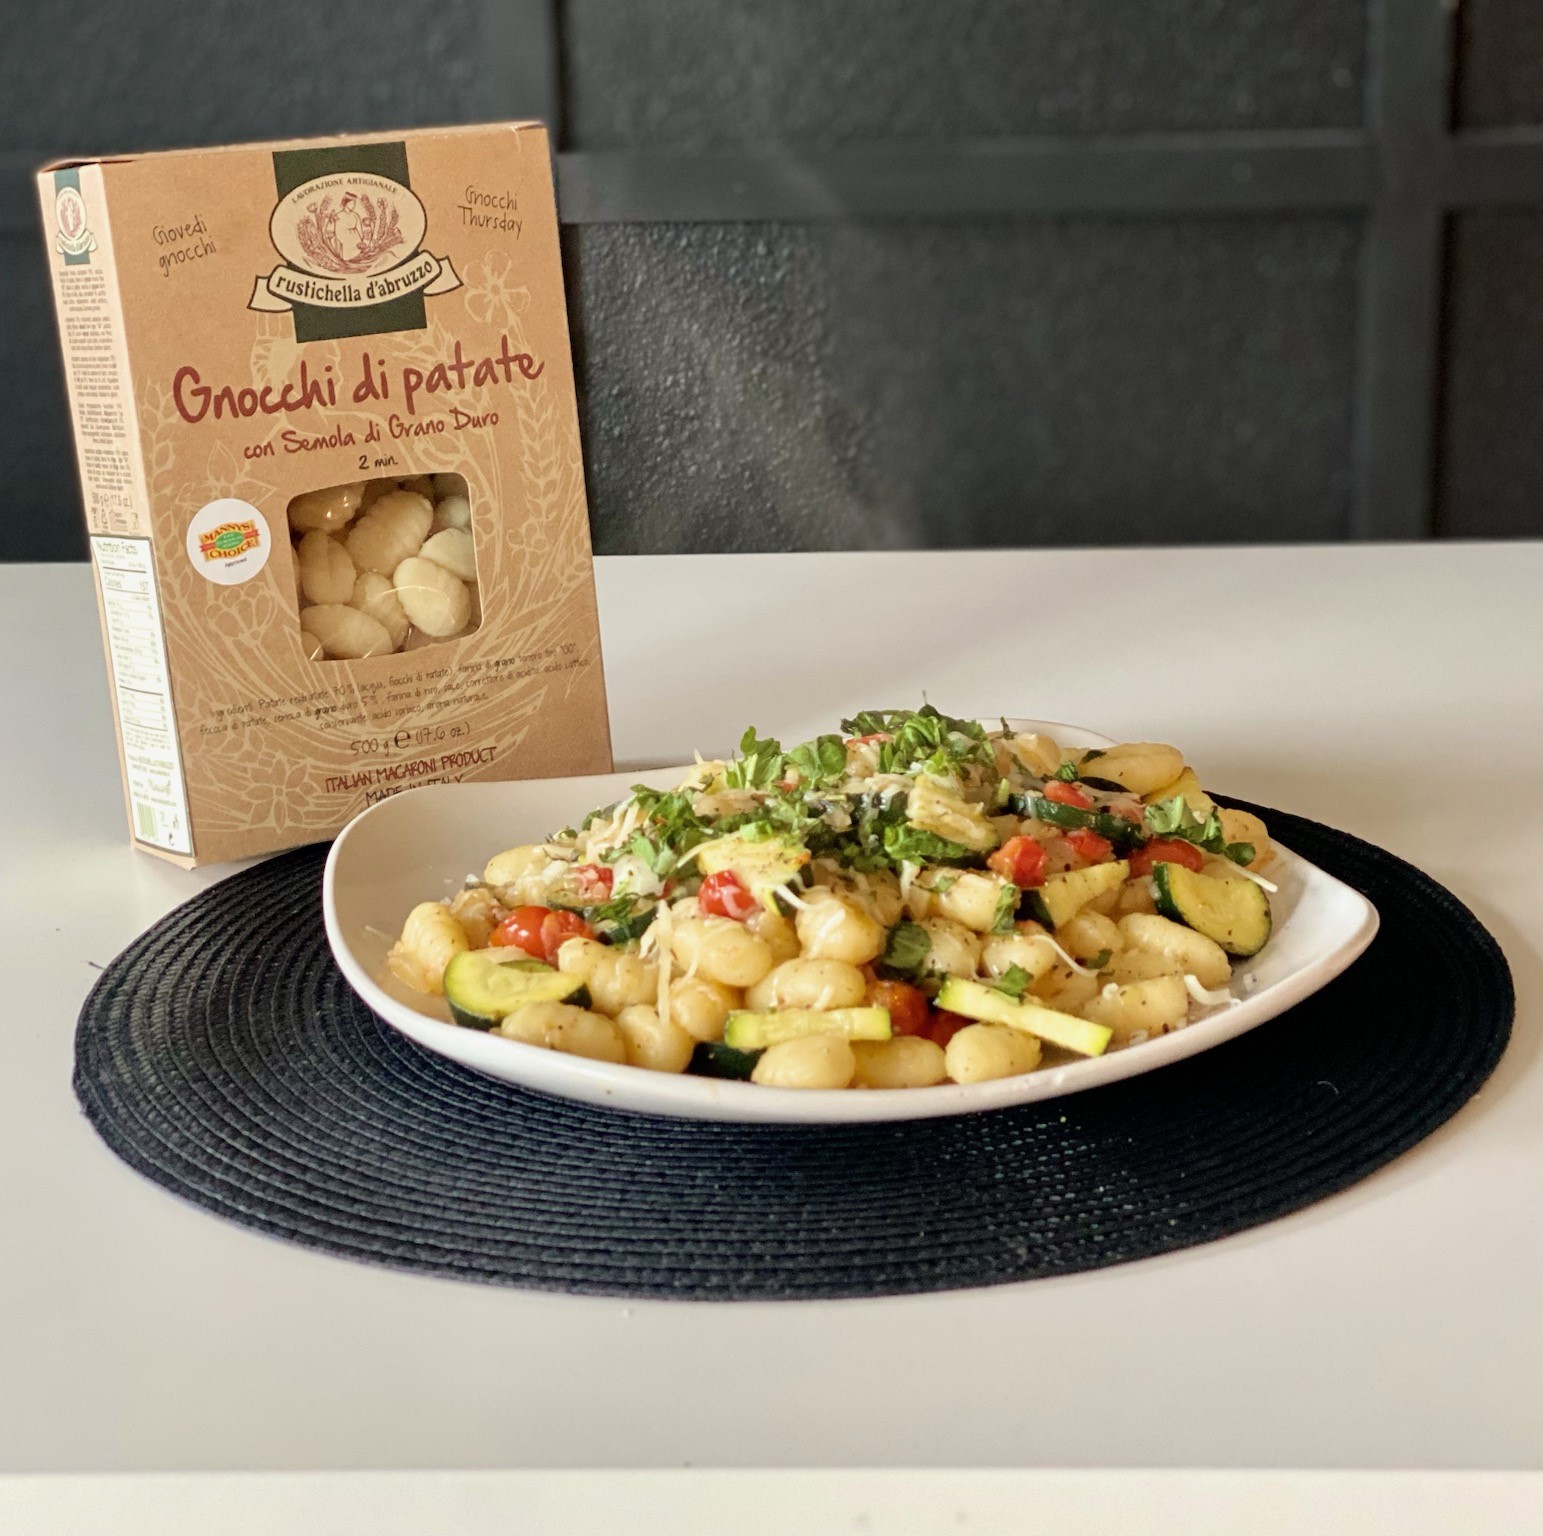 Manny’s Choice Garlic Gnocchi with Vegetables